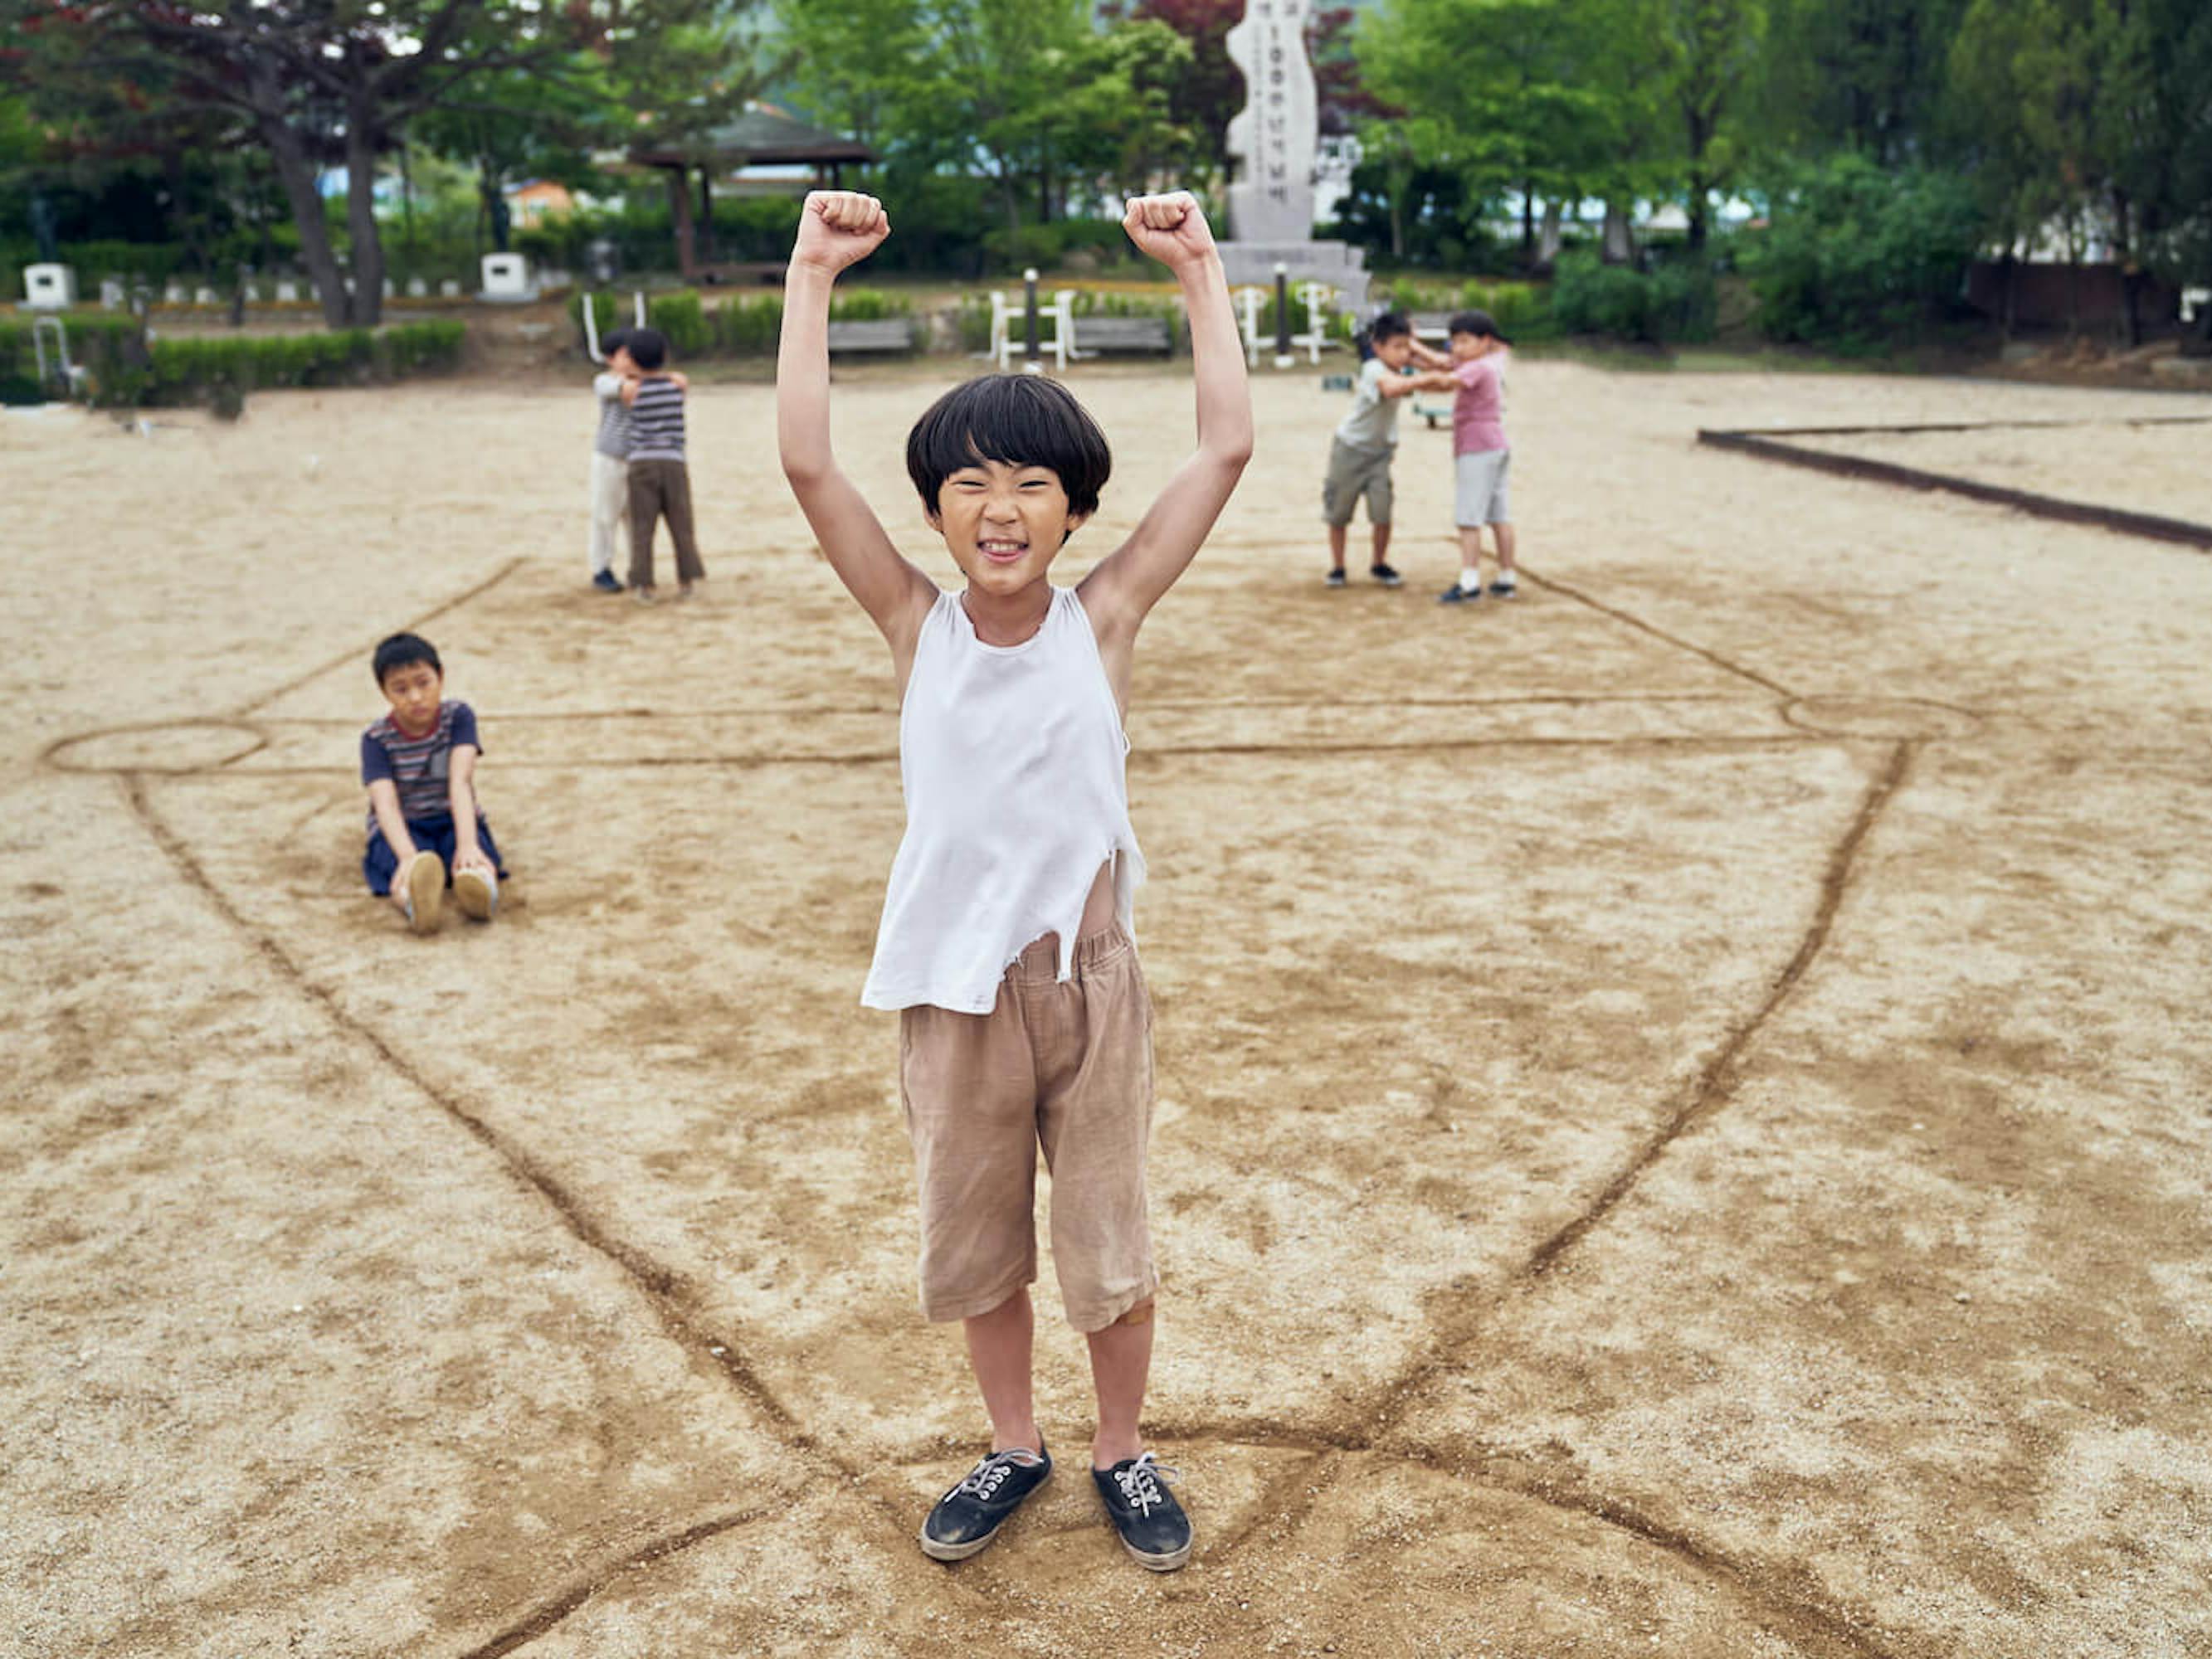 A young child raises their hands wearing khakis and a white tank top. Behind them are a bunch of little kids playing in the sand.